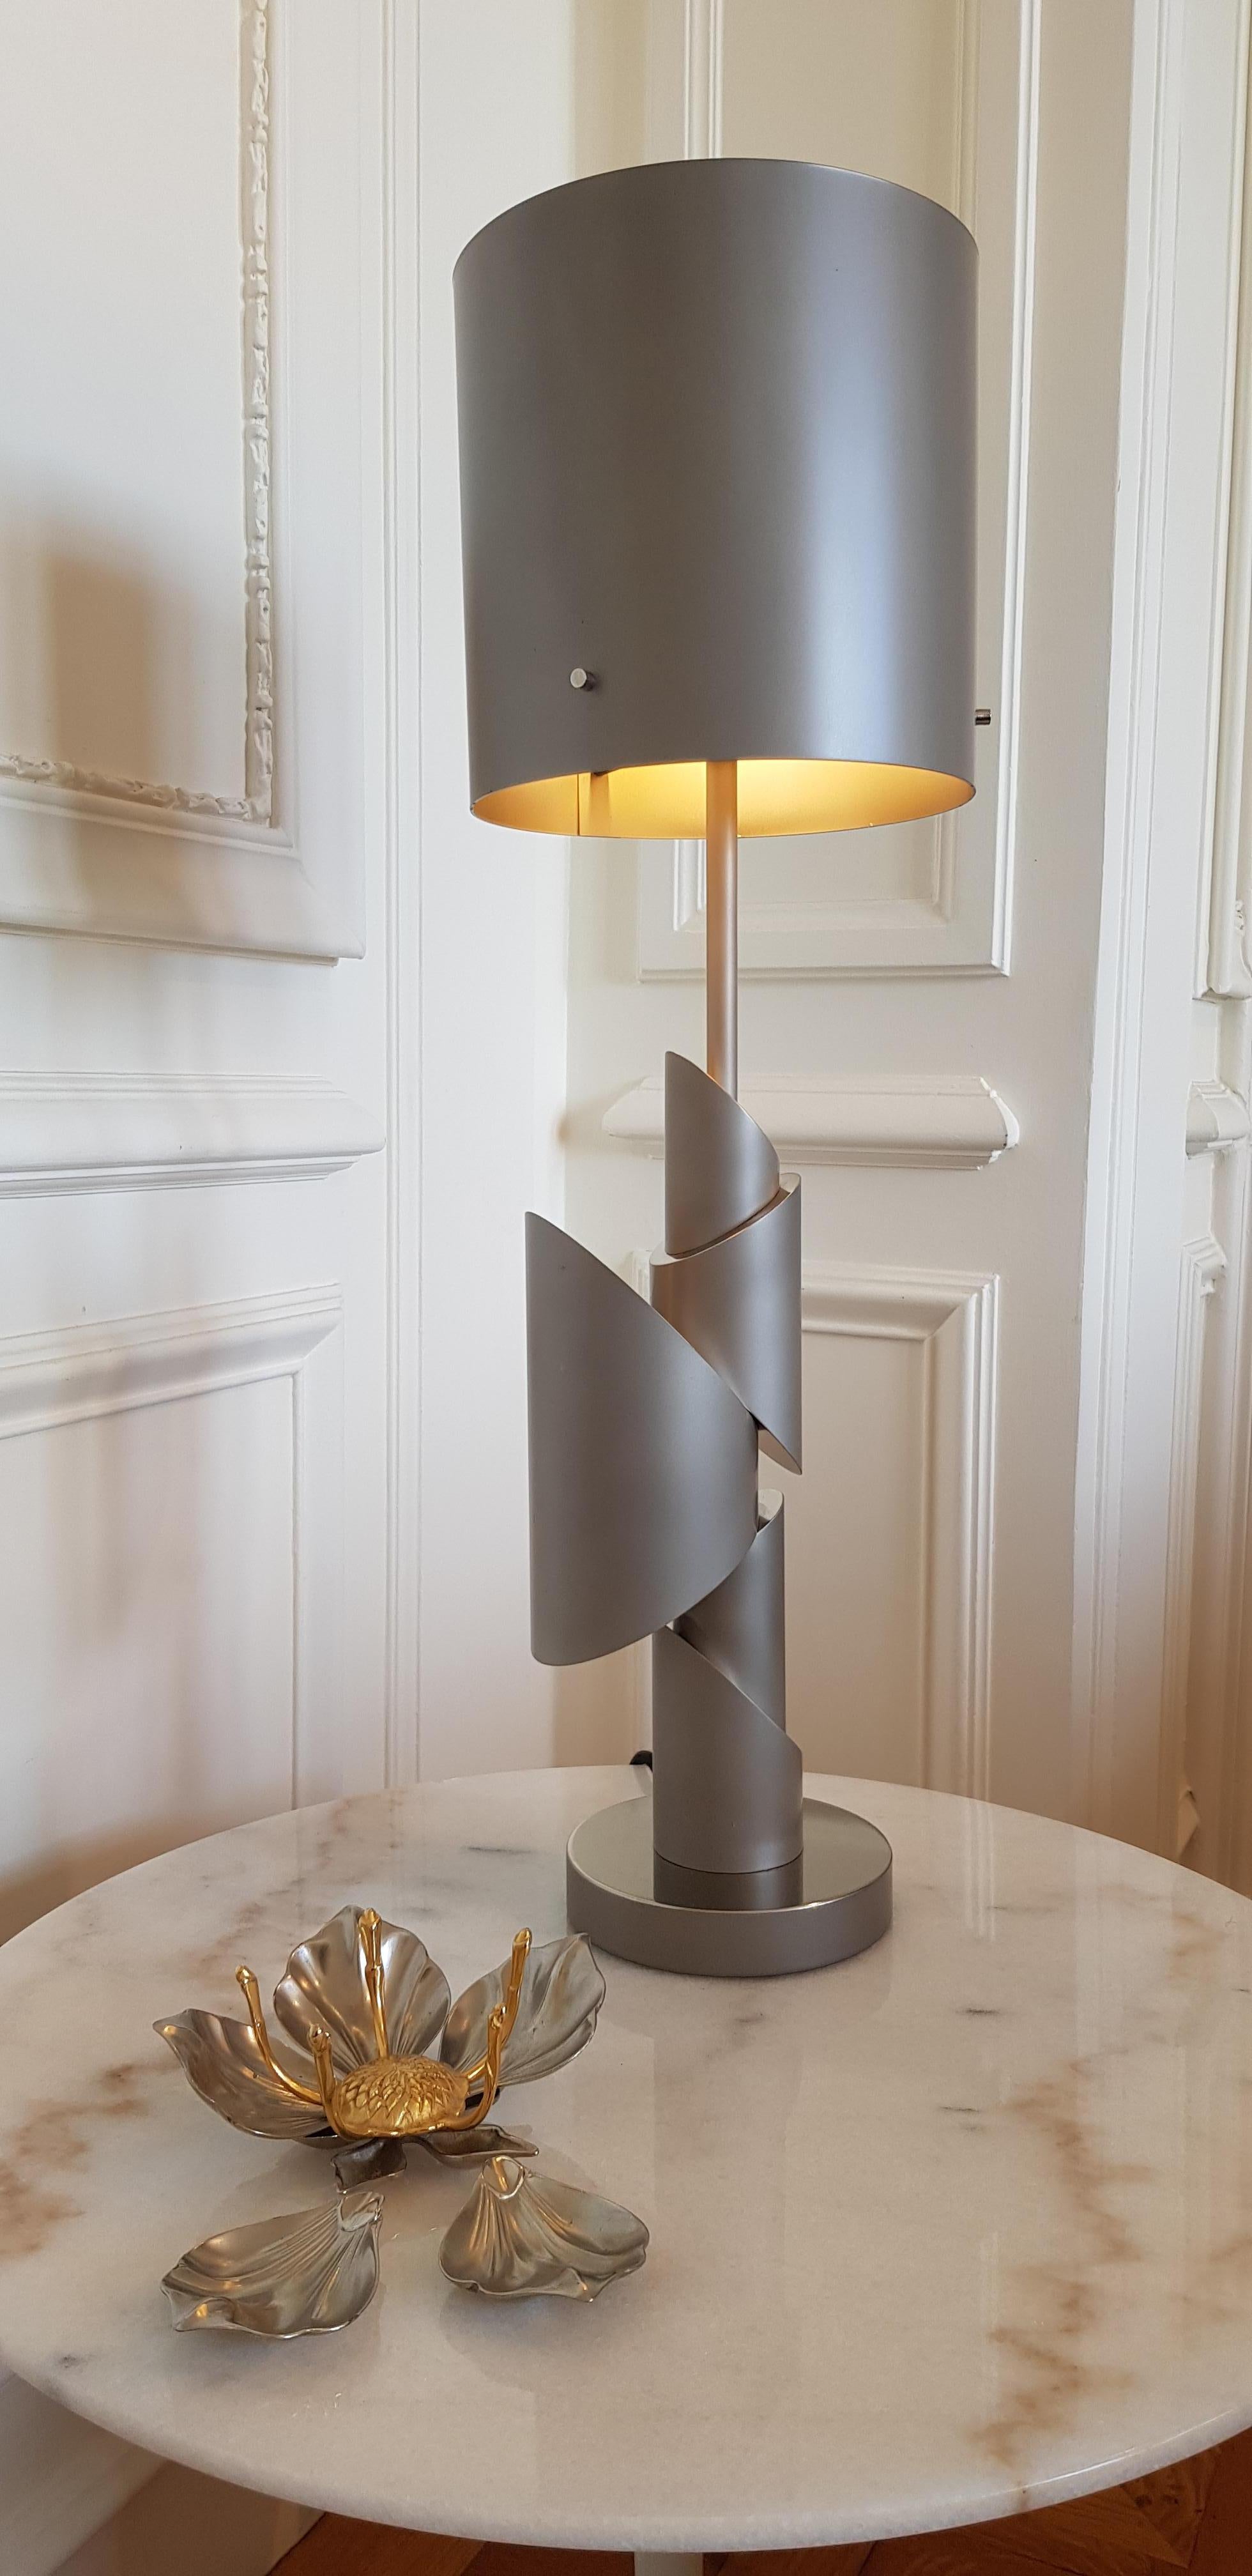 KRS III Table Lamp with Sandblasted and Mirror Polished Nickel Finish (Französisch)